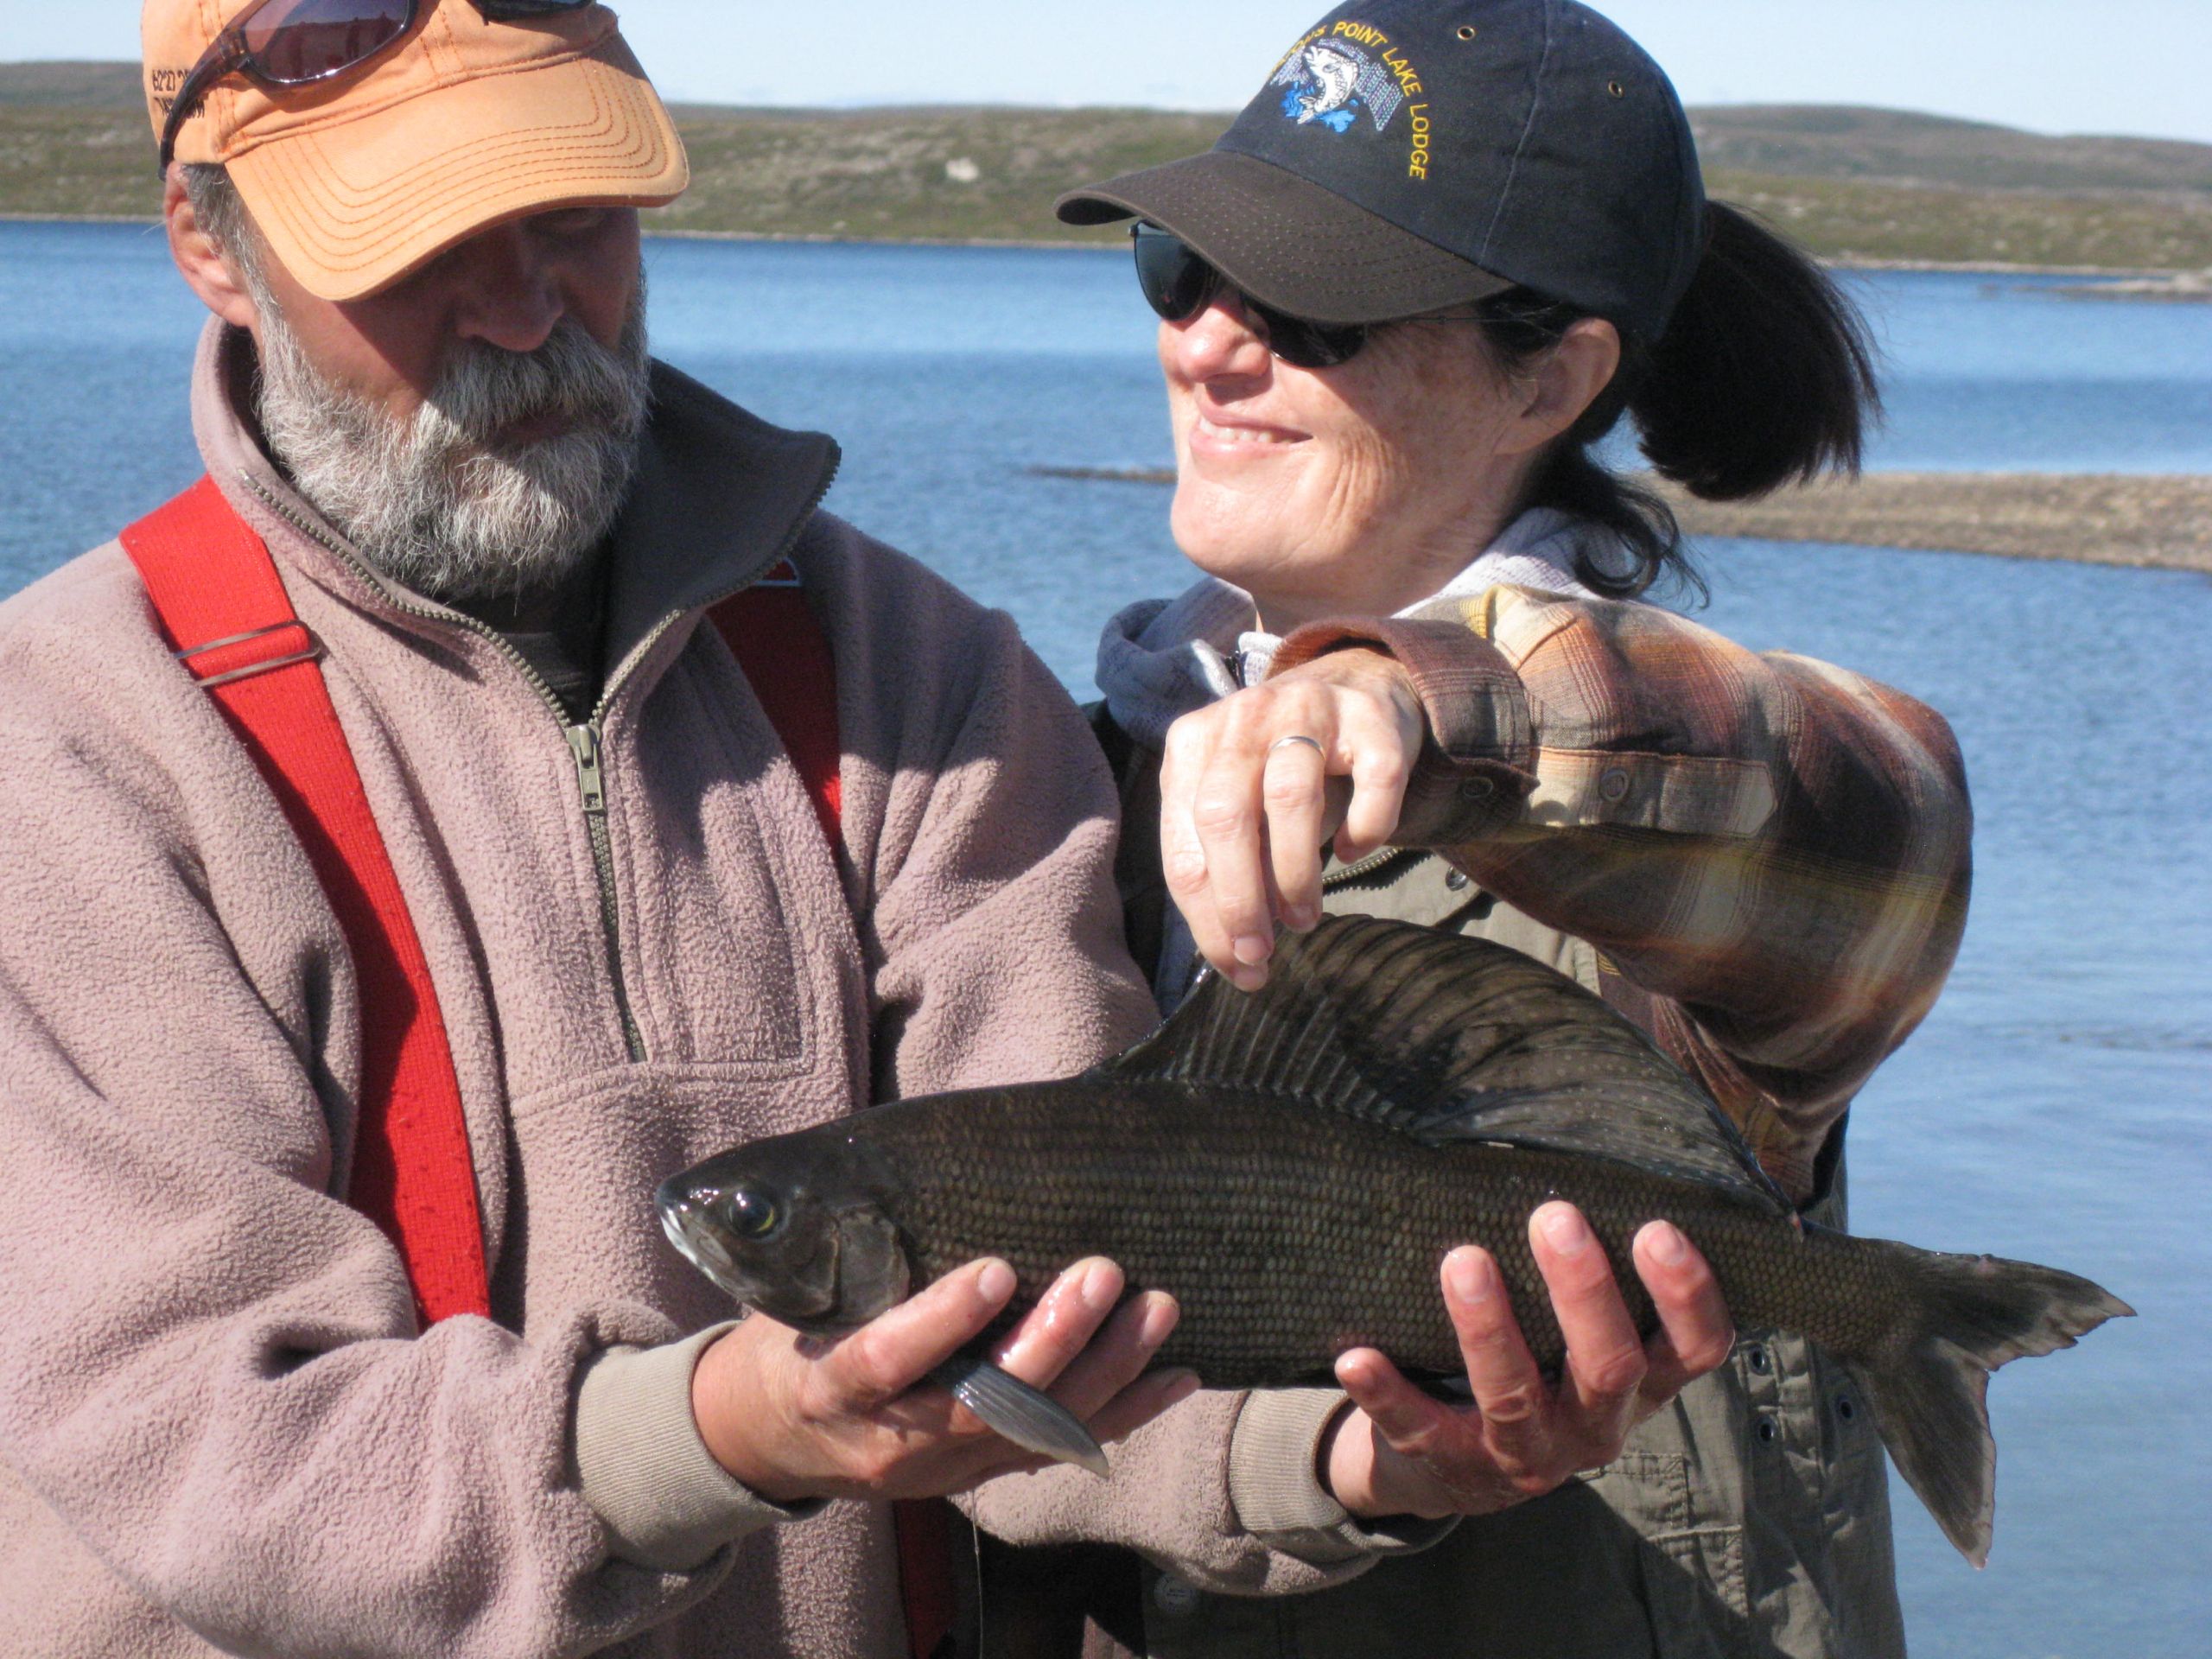 A fishing guide with a very happy guest smiling while holding the dorsal fin of an Arctic Grayling